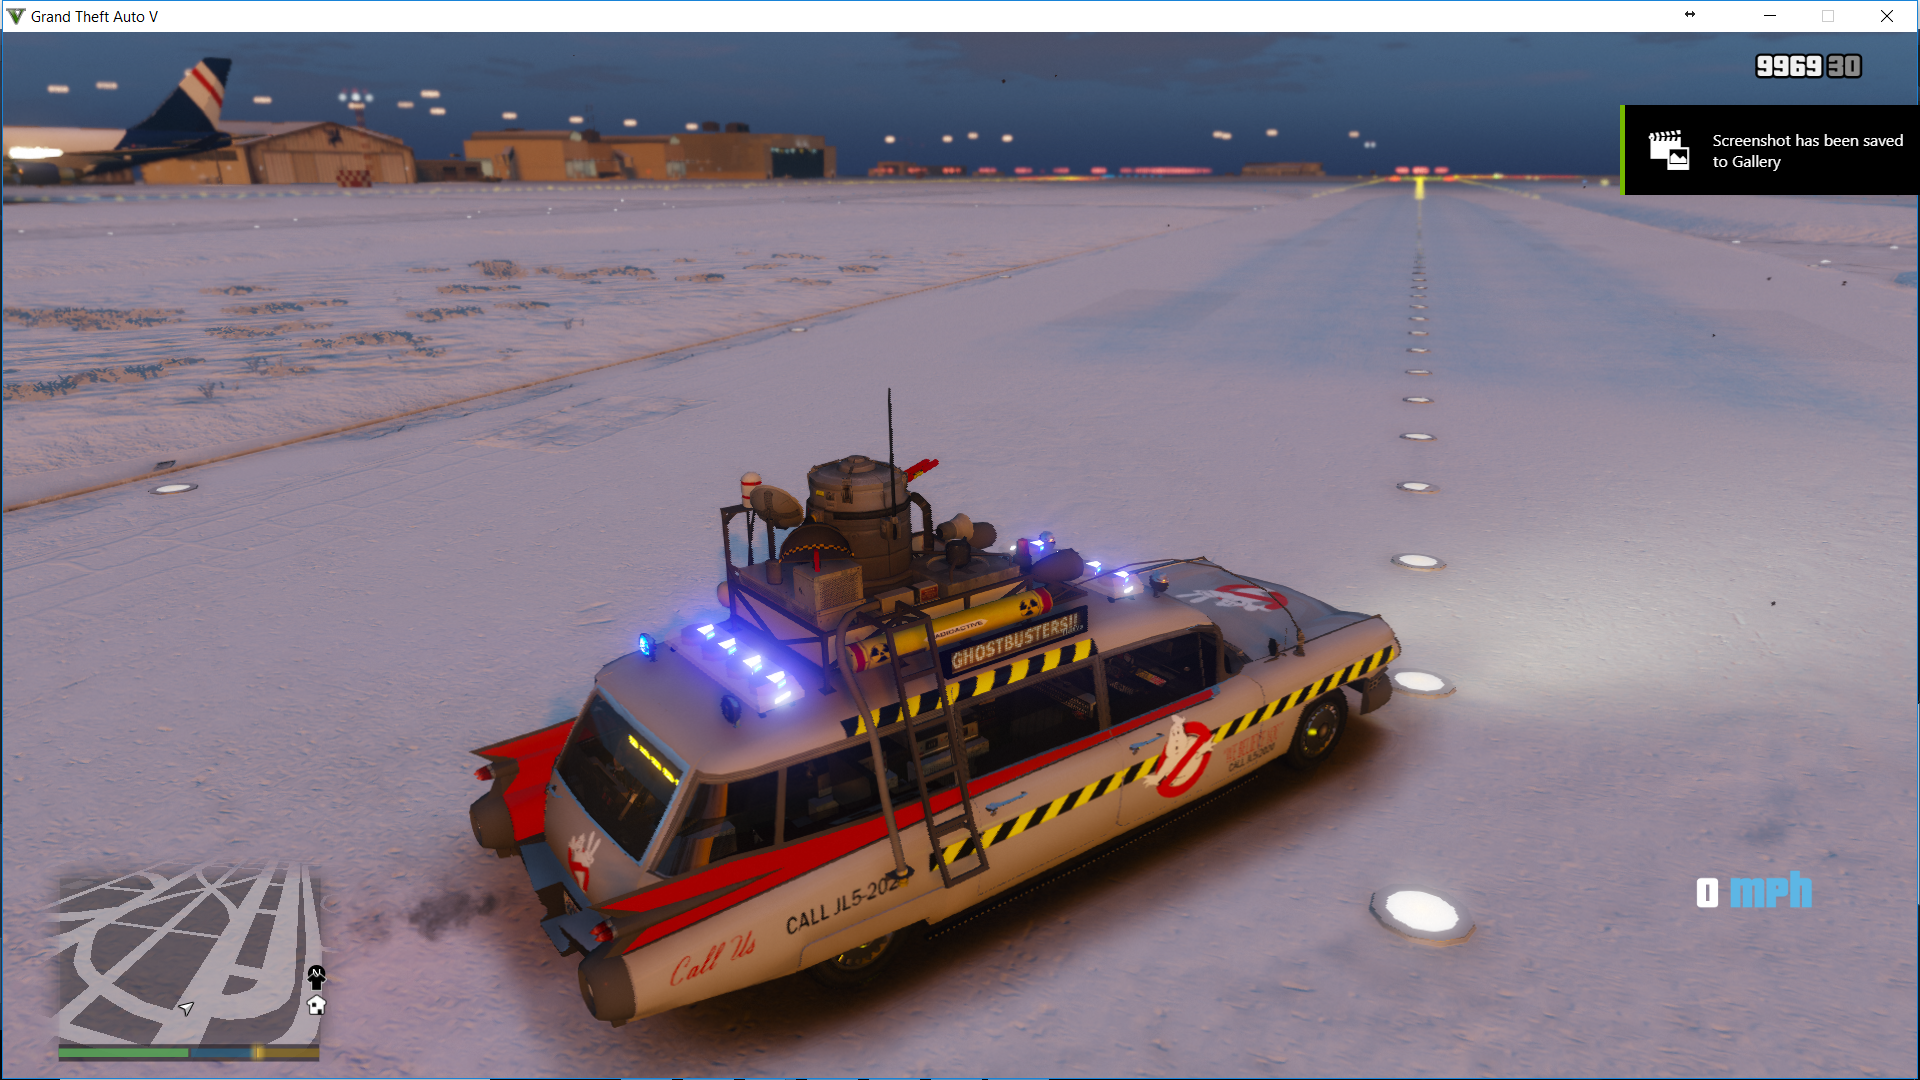 Ghostbusters Ecto-1 lookalike is coming to Grand Theft Auto Online